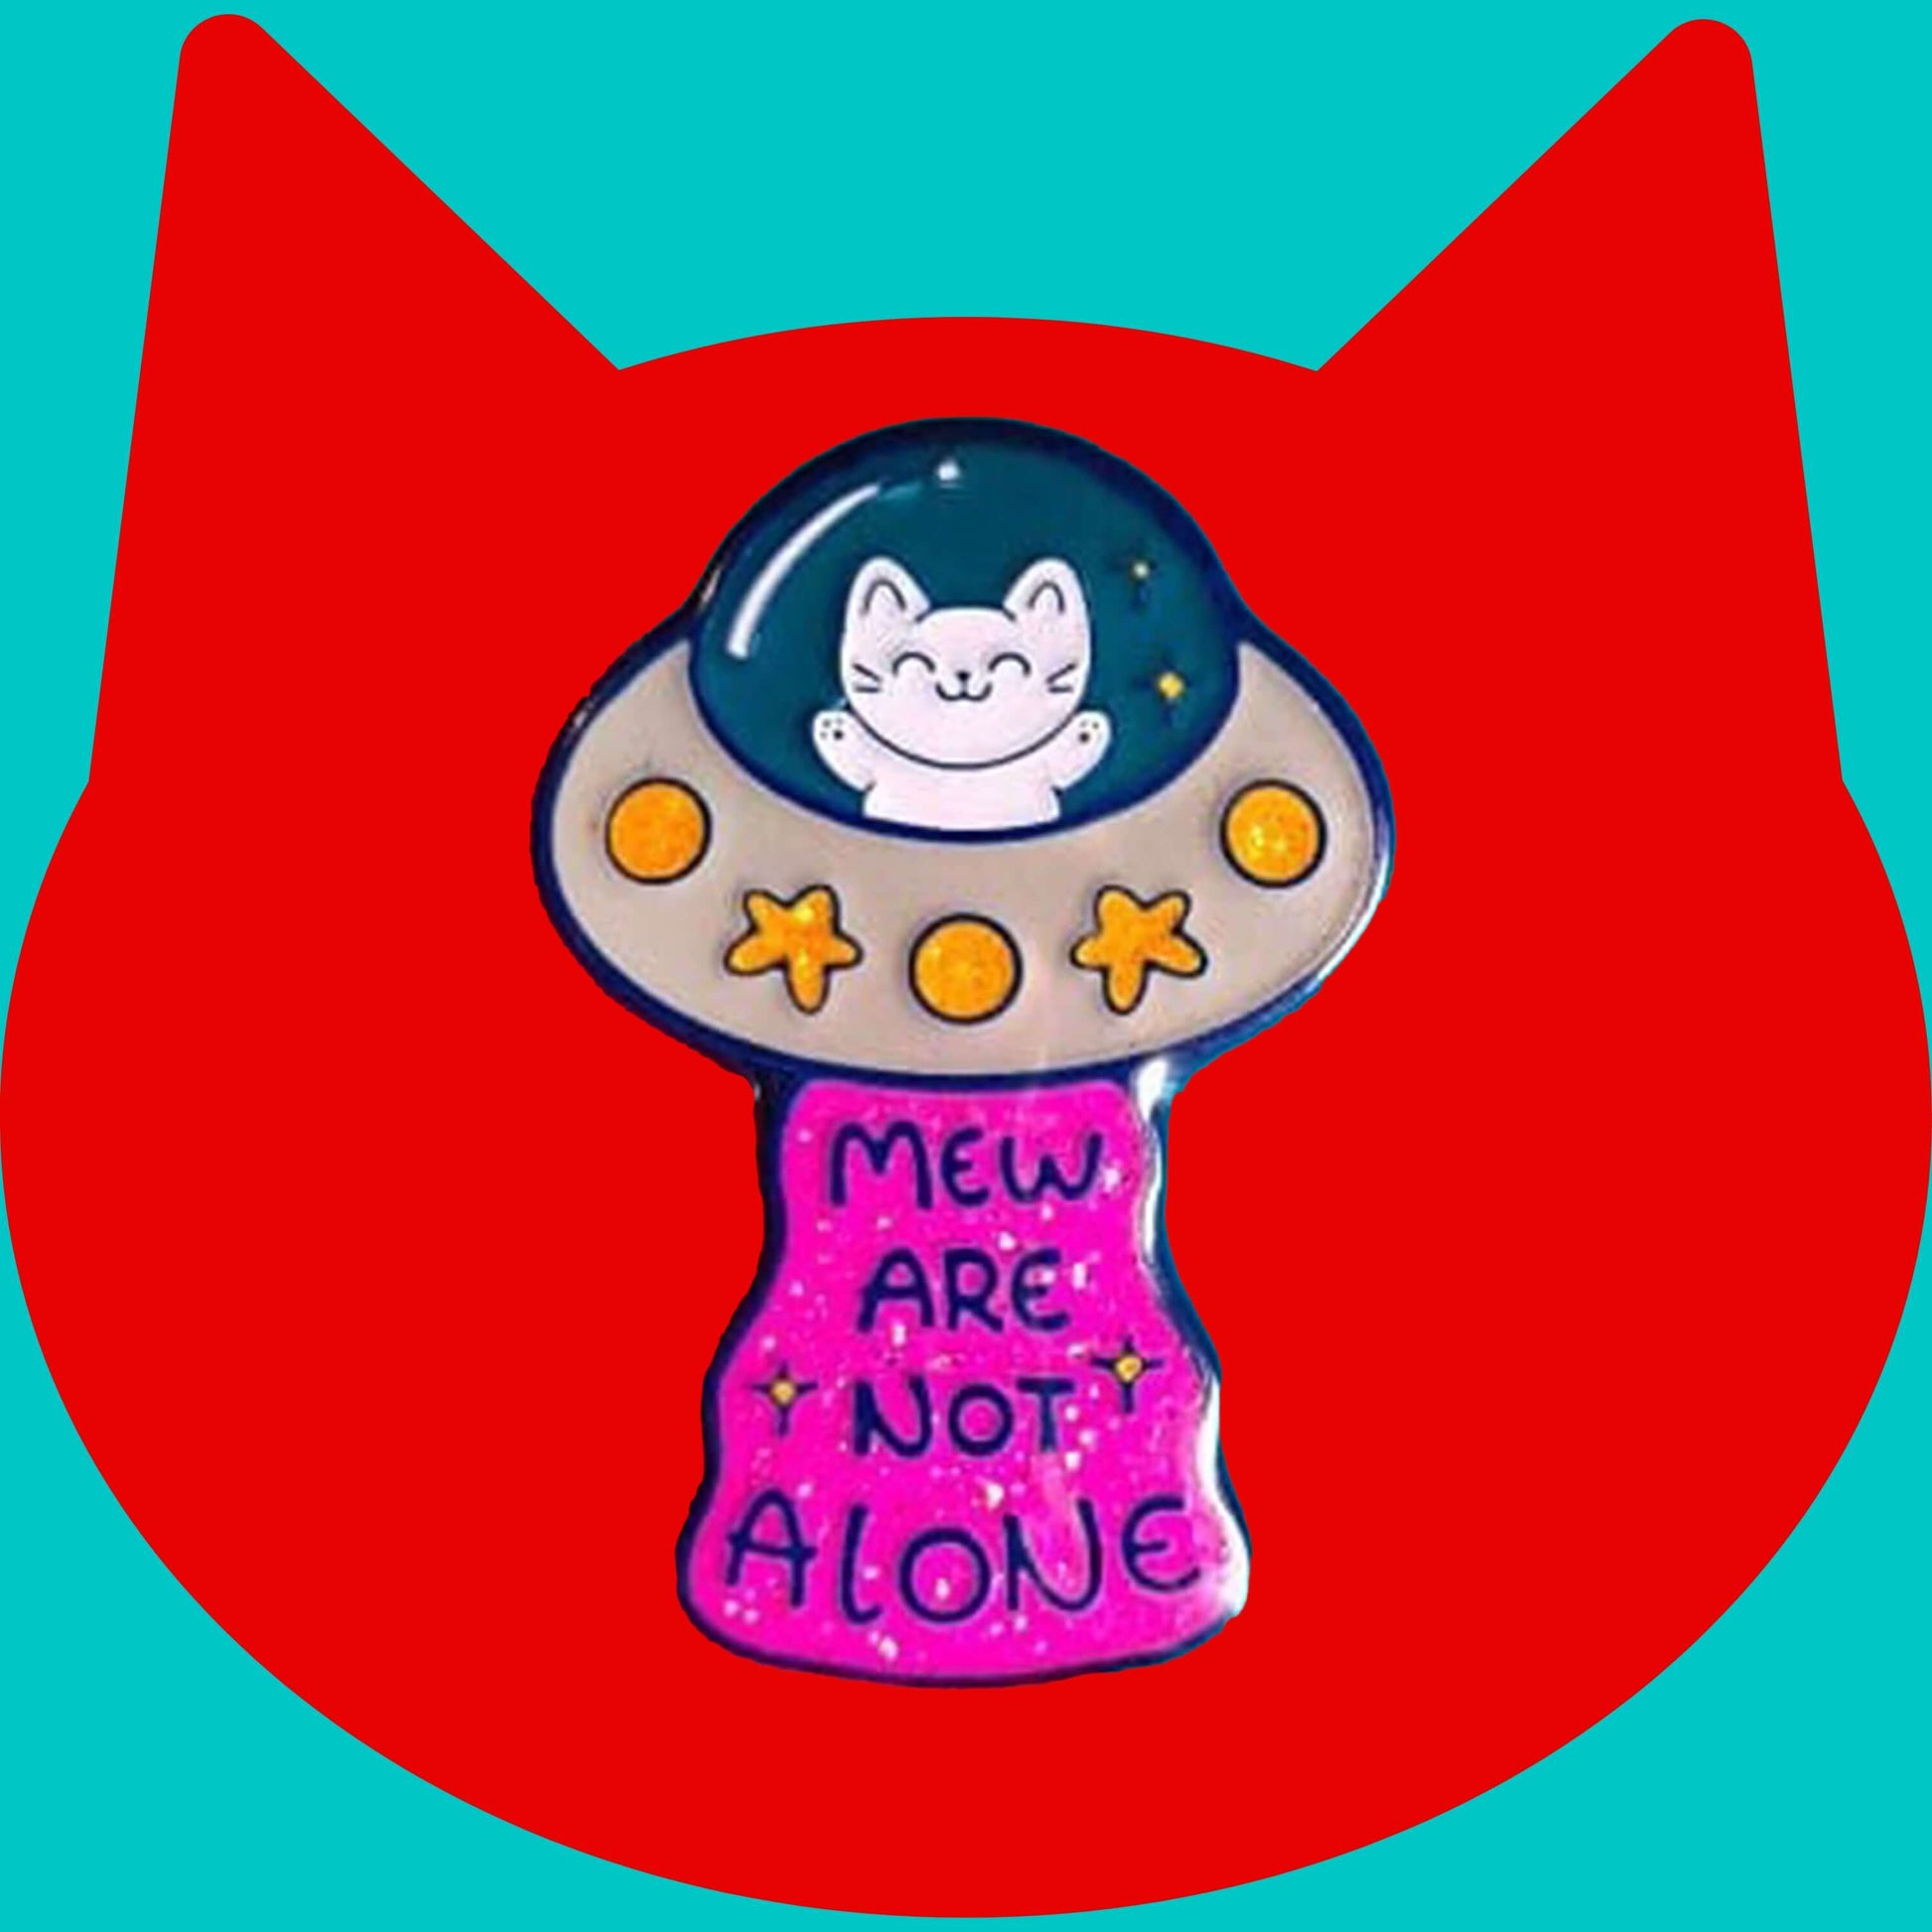 The Cat UFO Mew are not Alone Enamel Pin on a red and blue background. The blue outline pin is of a white smiling cat in a silver ufo spaceship with yellow glittery stars and circles, underneath is pink glittery beam with blue text reading 'mew are not alone' a pun on you are not alone.